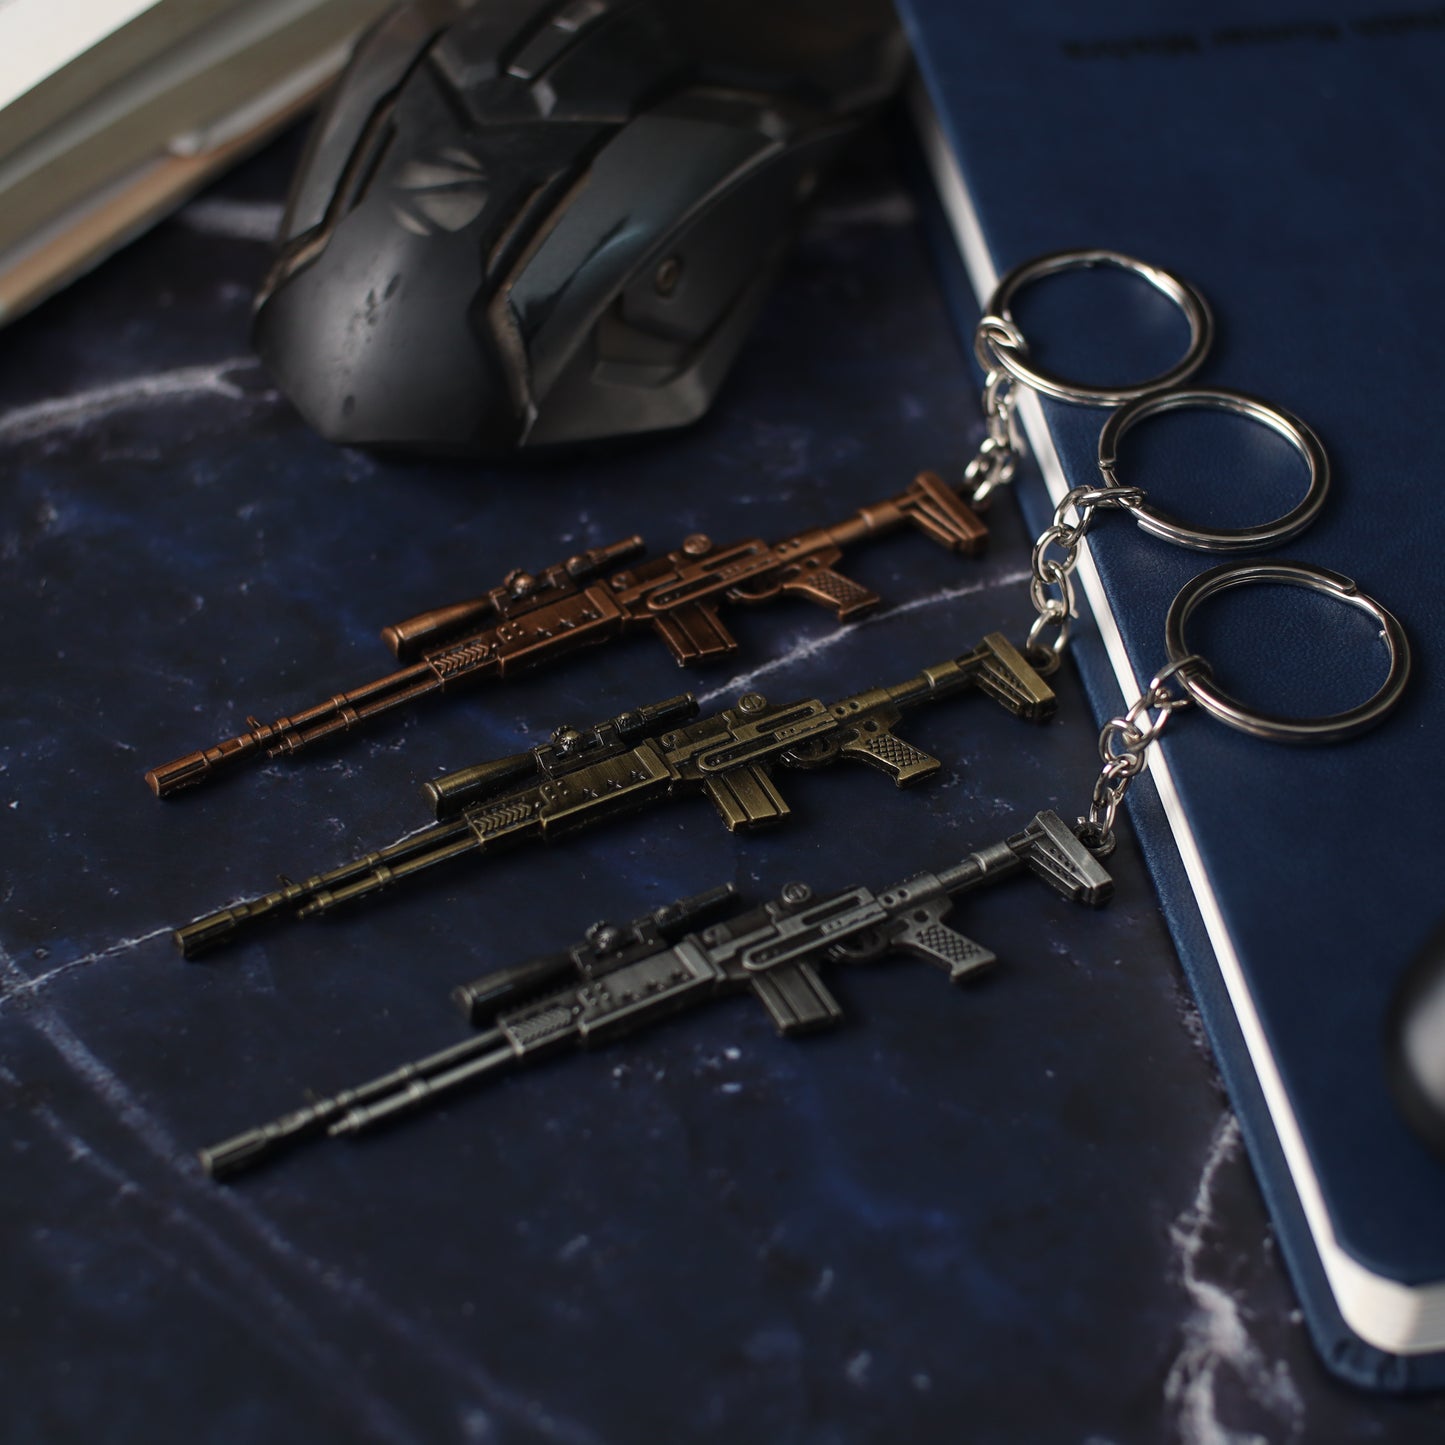 MK14 Elite Keychains For Bikes Elevate Your Gear with Grey, Bronze, or Copper Variants